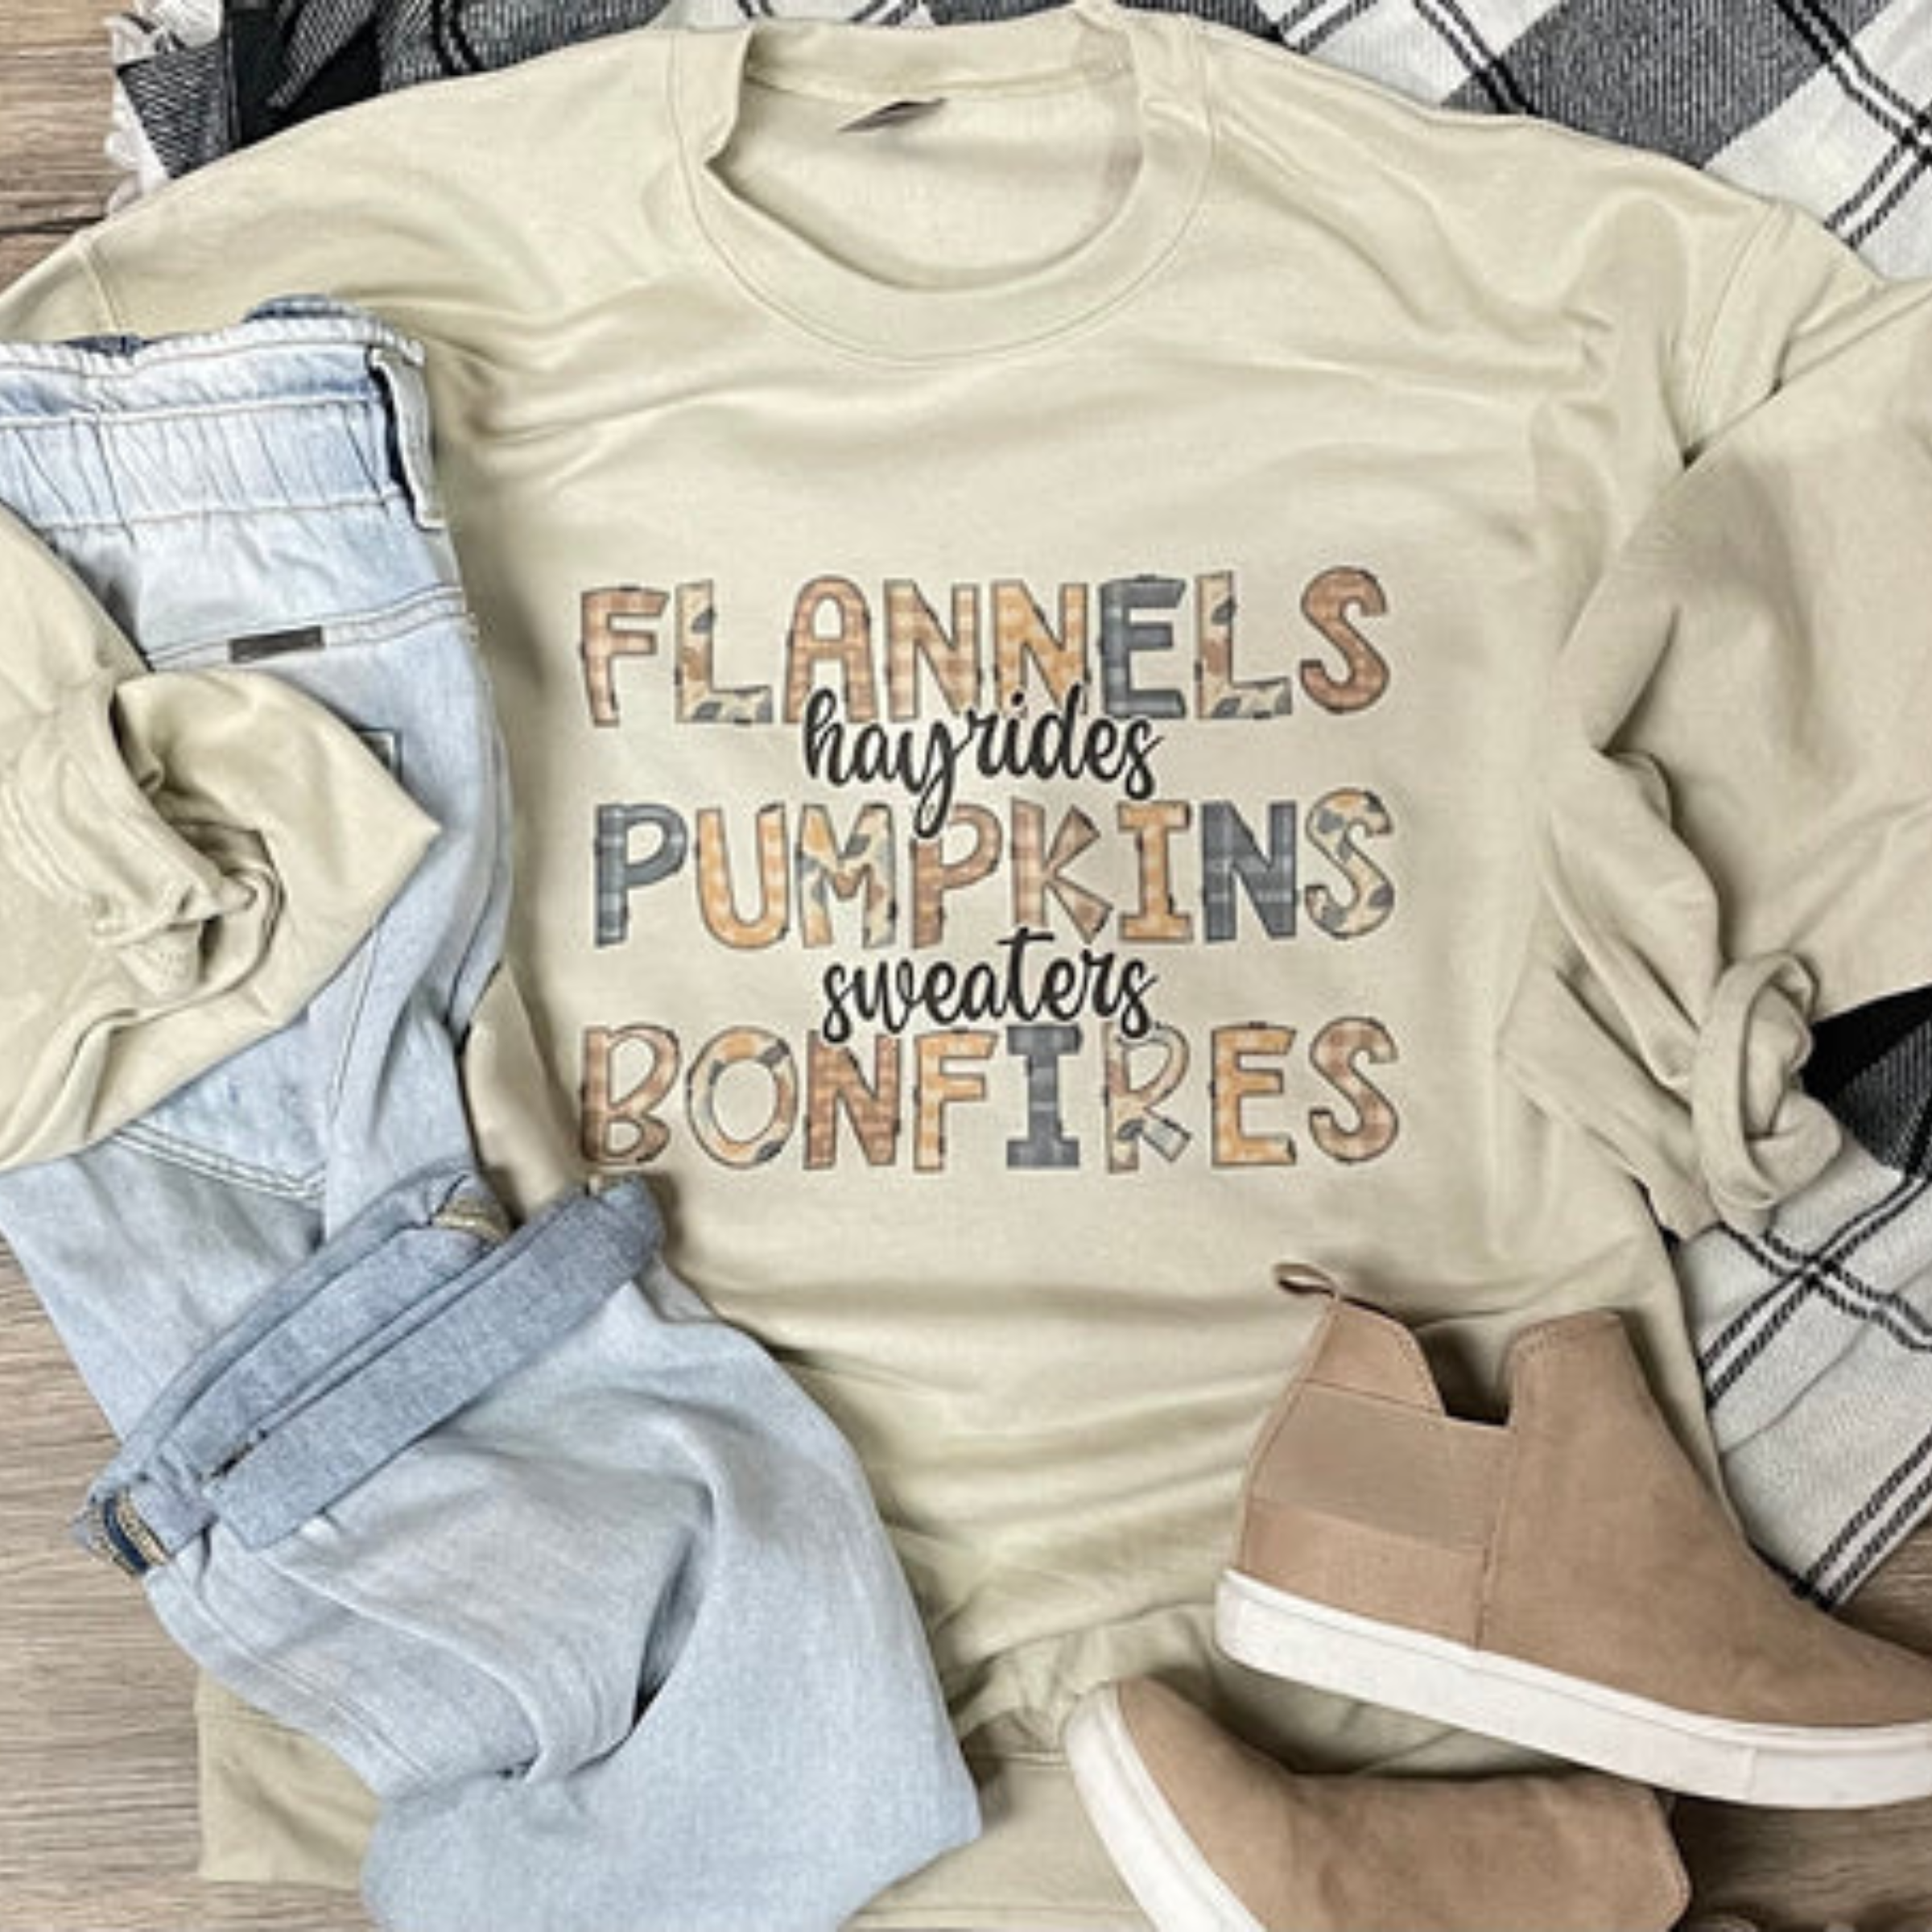 This cream sweatshirt features a hand drawn design that says "Flannels, Hayrides, Pumpkins, Sweaters, Bonfires". The words "Flannels", "Pumpkins", and "Bonfires" are in capital font with fun, Fall patterns. The words "Hayrides" and "Sweaters" are in a cursive, lowercase, black font. 